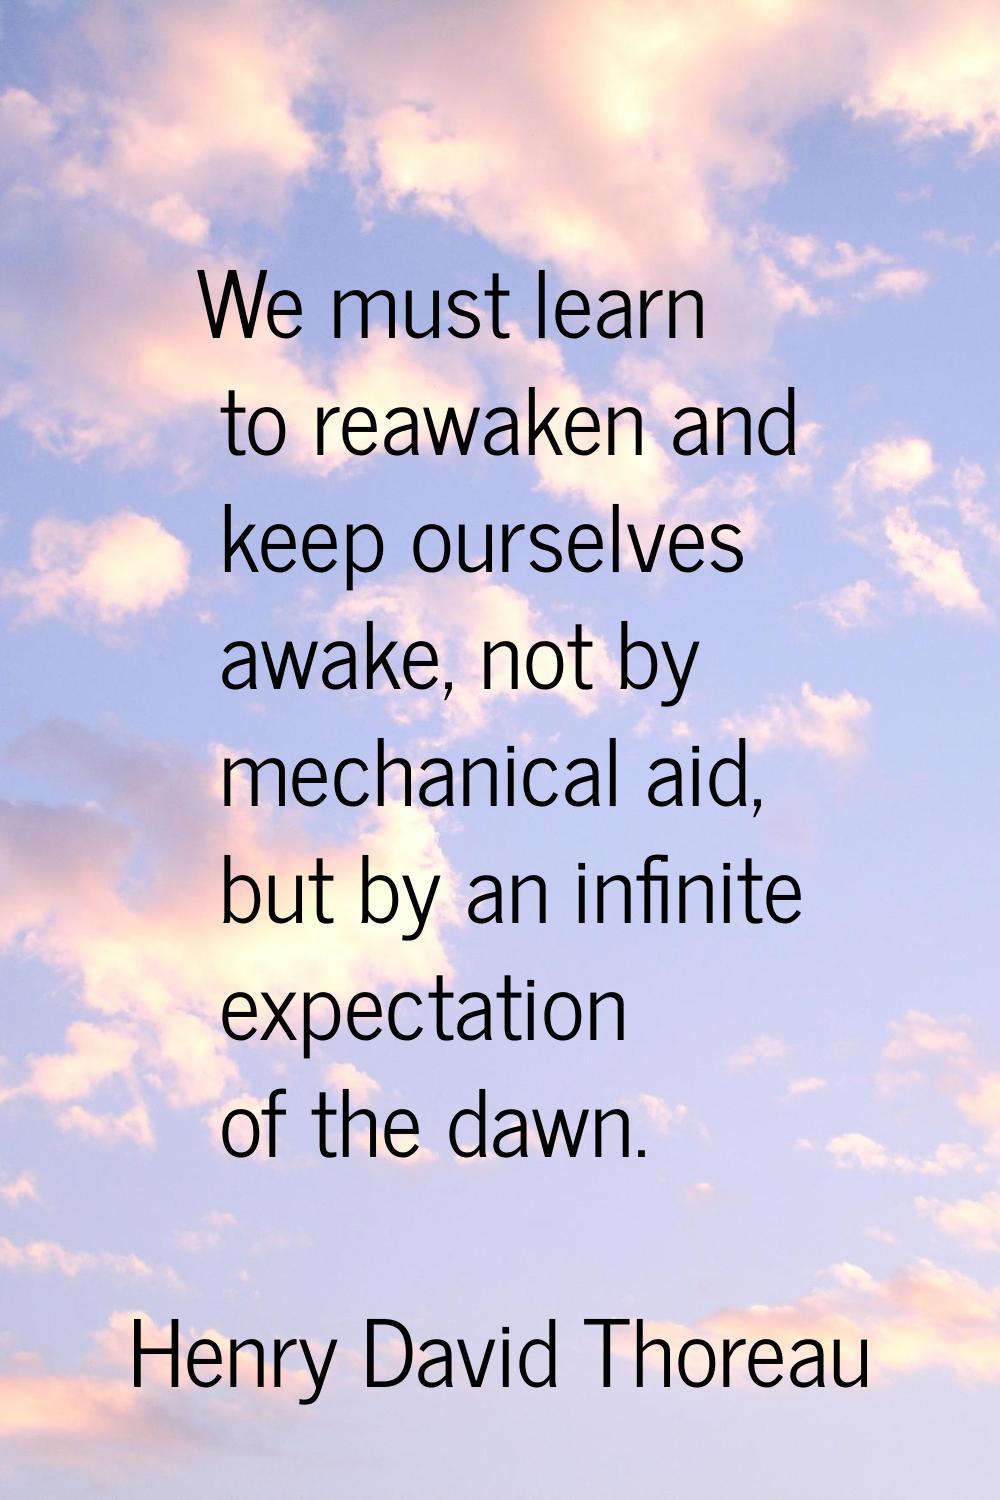 We must learn to reawaken and keep ourselves awake, not by mechanical aid, but by an infinite expec